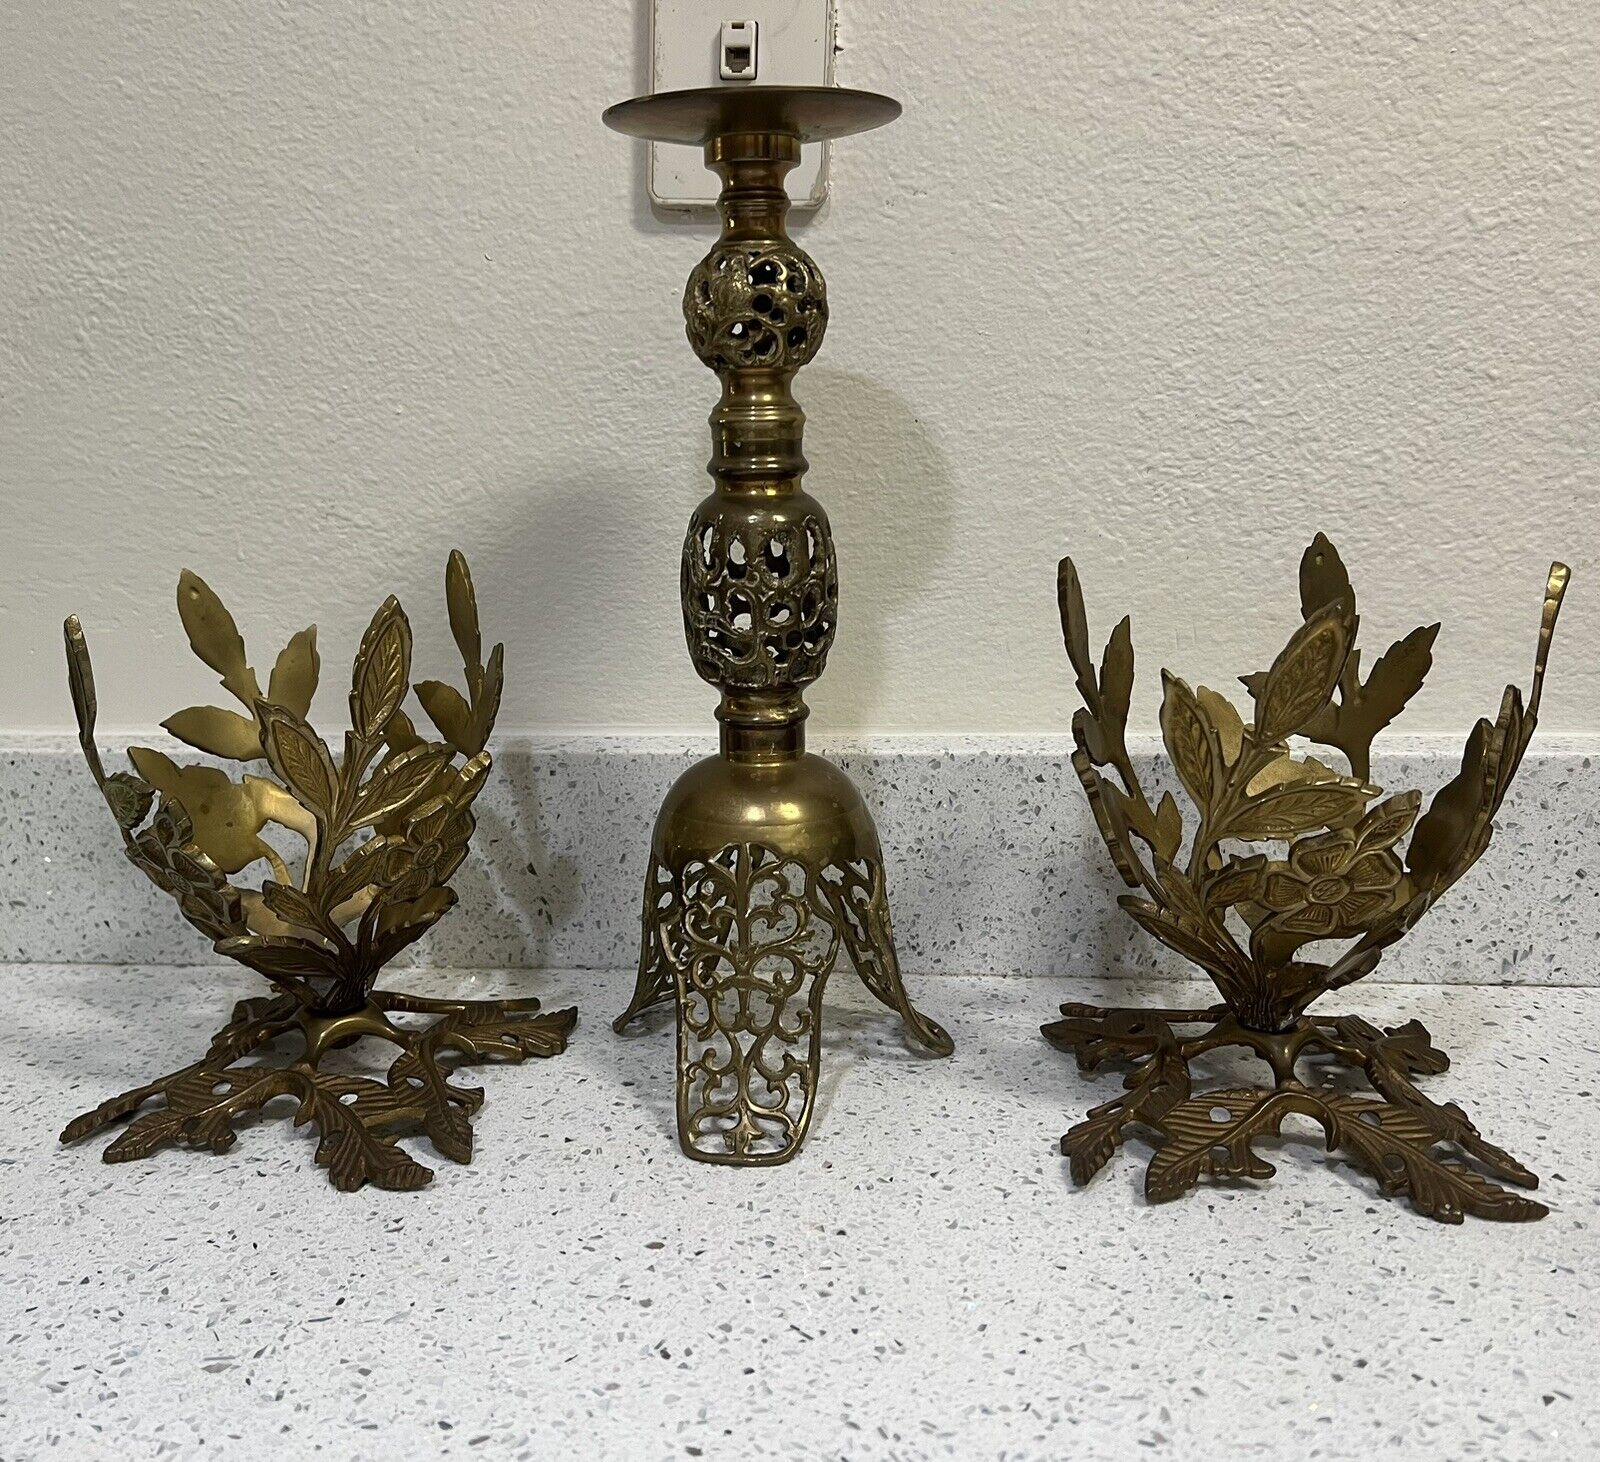 2 Brass Leaf Vases or Display Stands And A Brass Ornate Tall Candle Holder